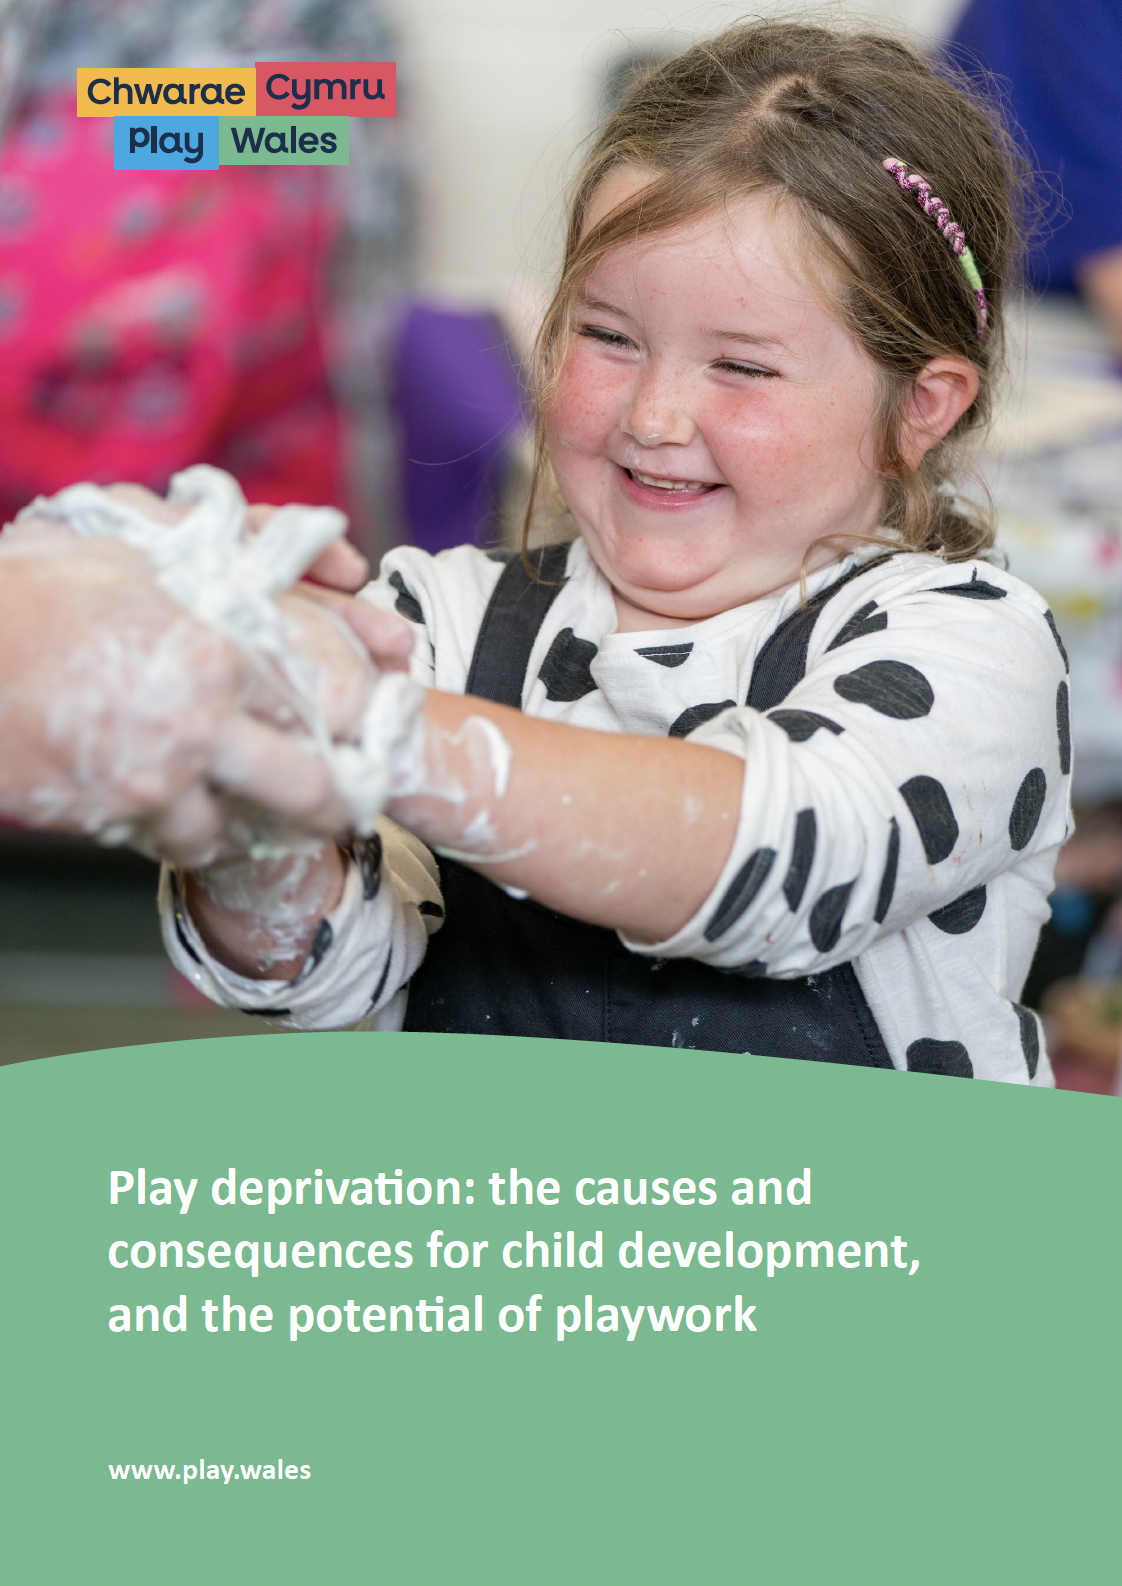 Play deprivation: the causes and consequences for child development, and the potential of playwork